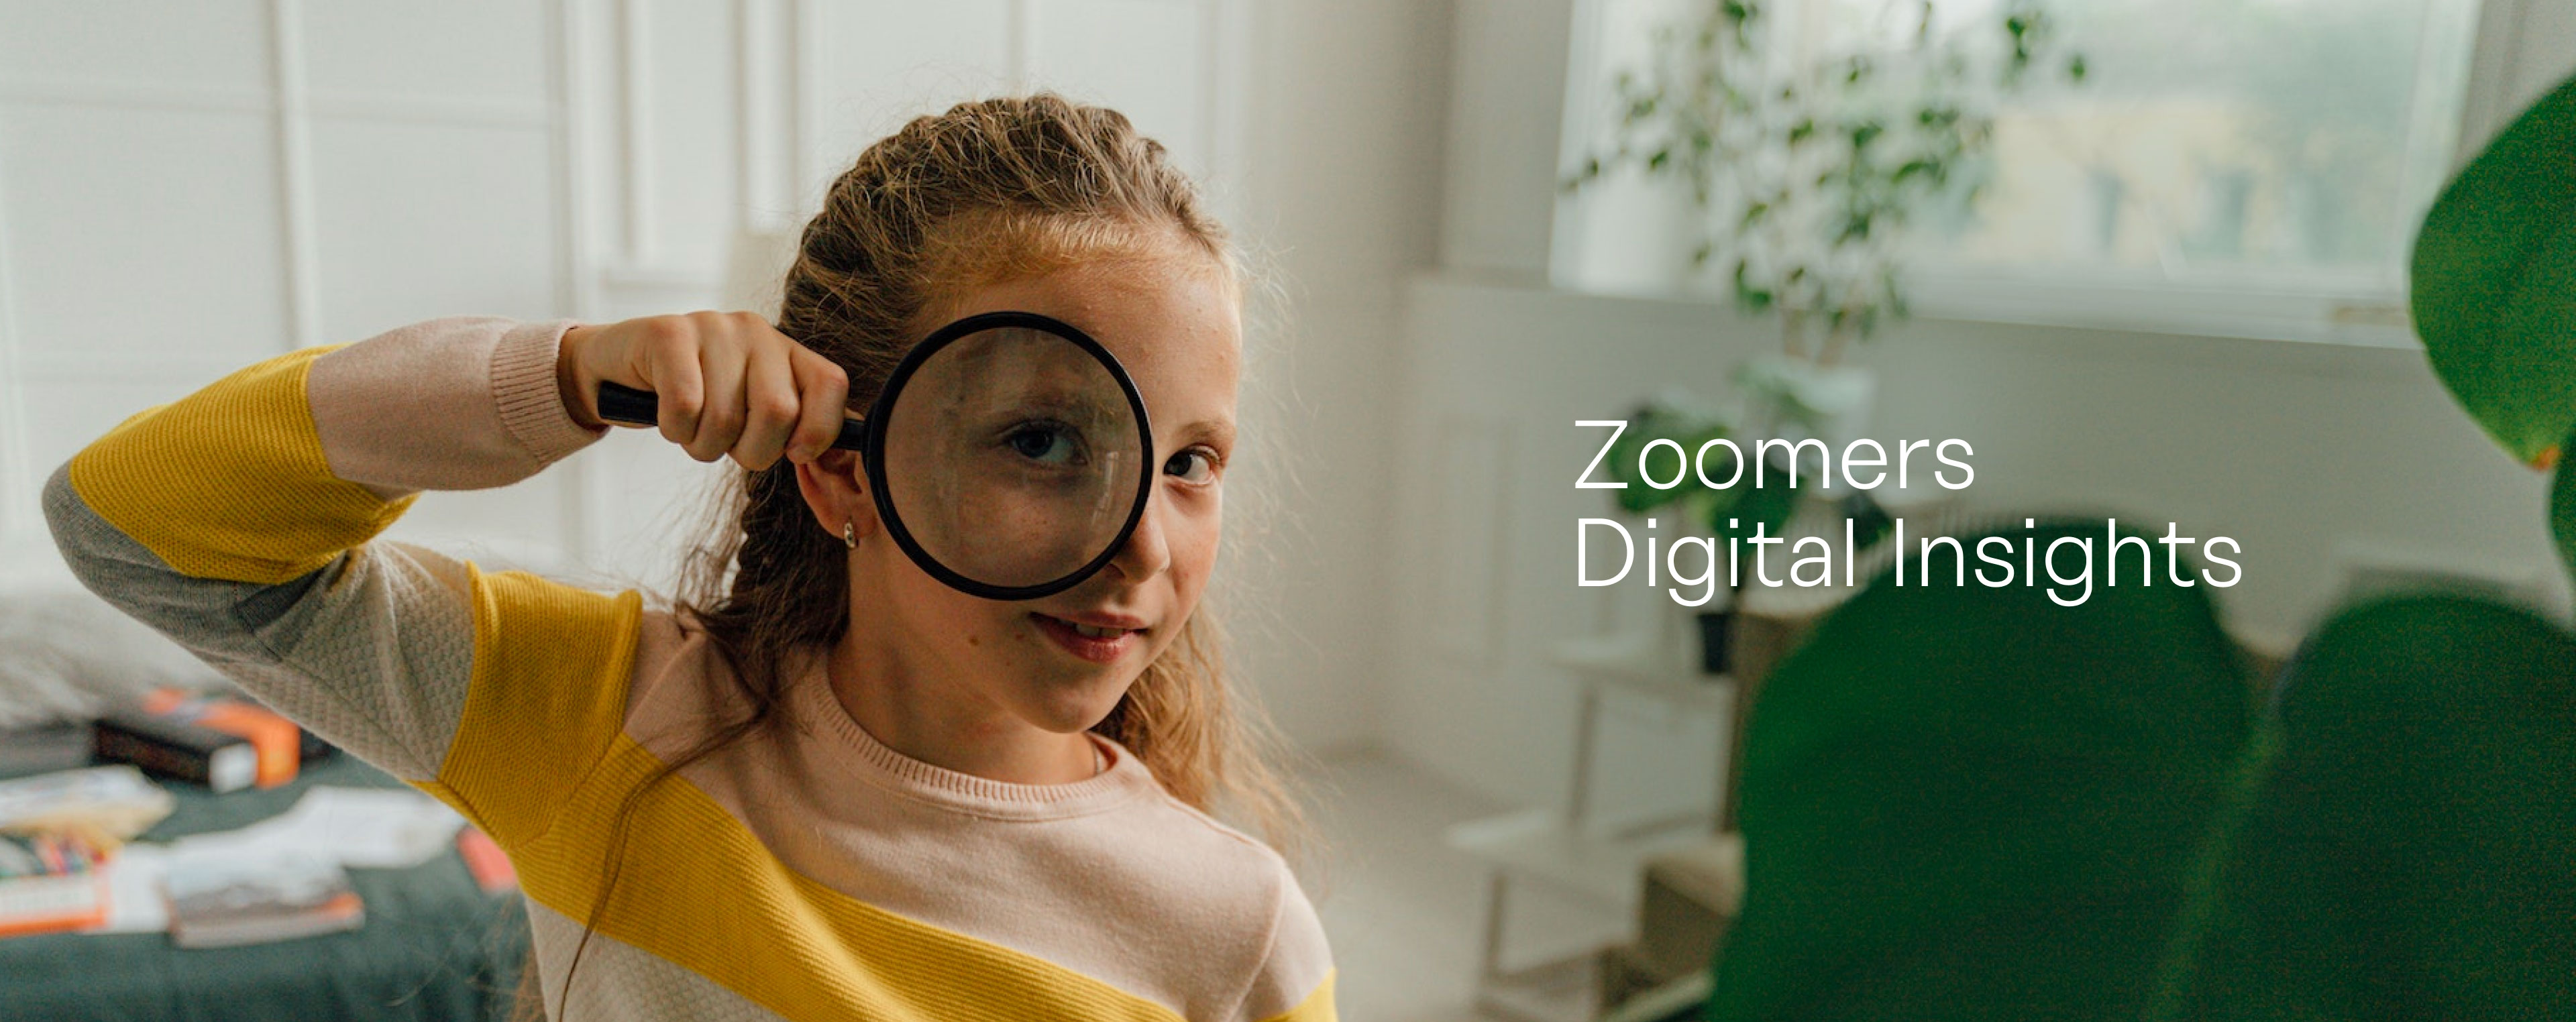 Zoomers Digital Insights